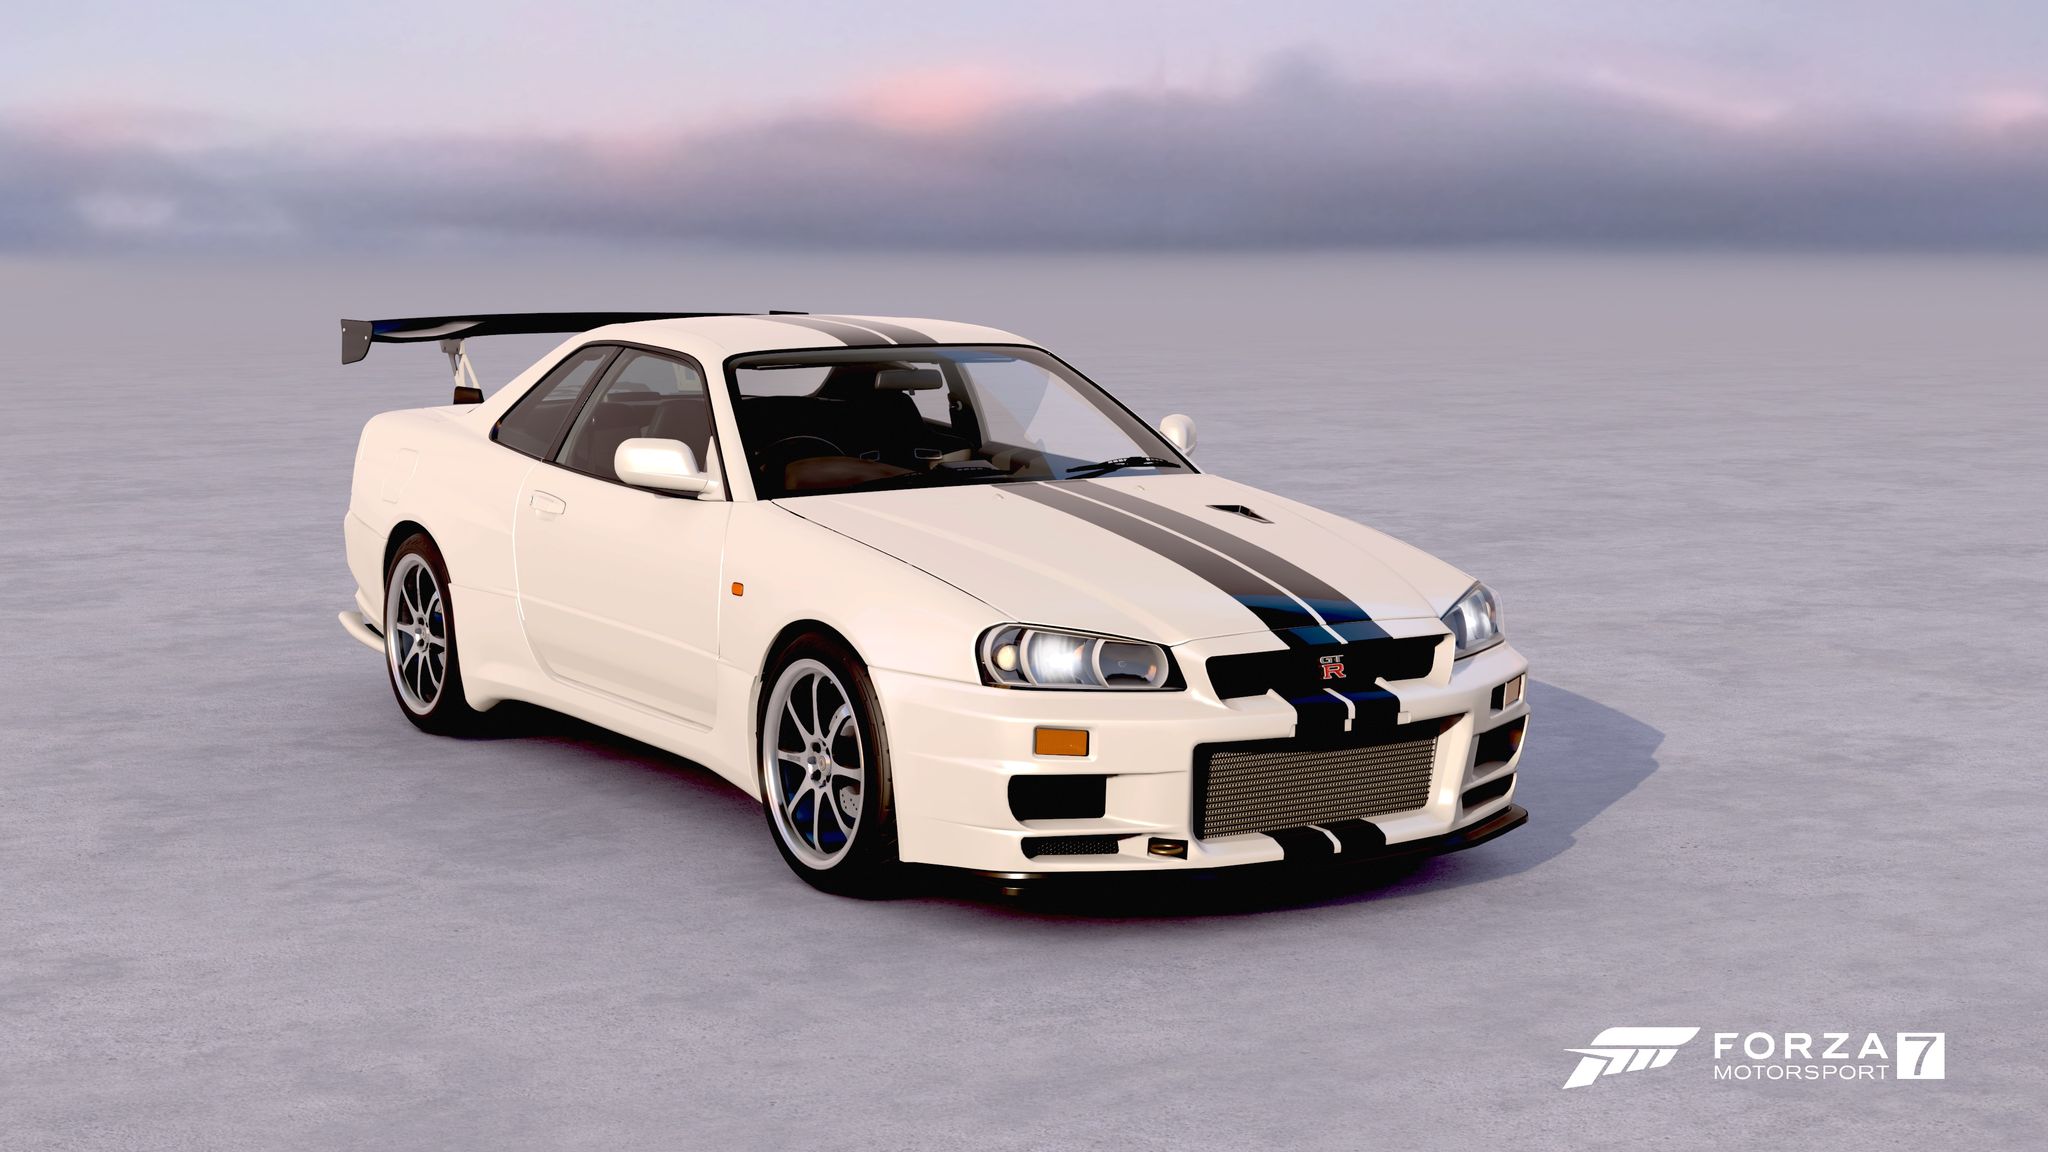 A screenshot from Forza Motorsport 7 on Xbox showing a Nissan R34 Skyline with pearlescent cream paint and twin black racing stripes running from the front bumper all the way across the bonnet and roof.